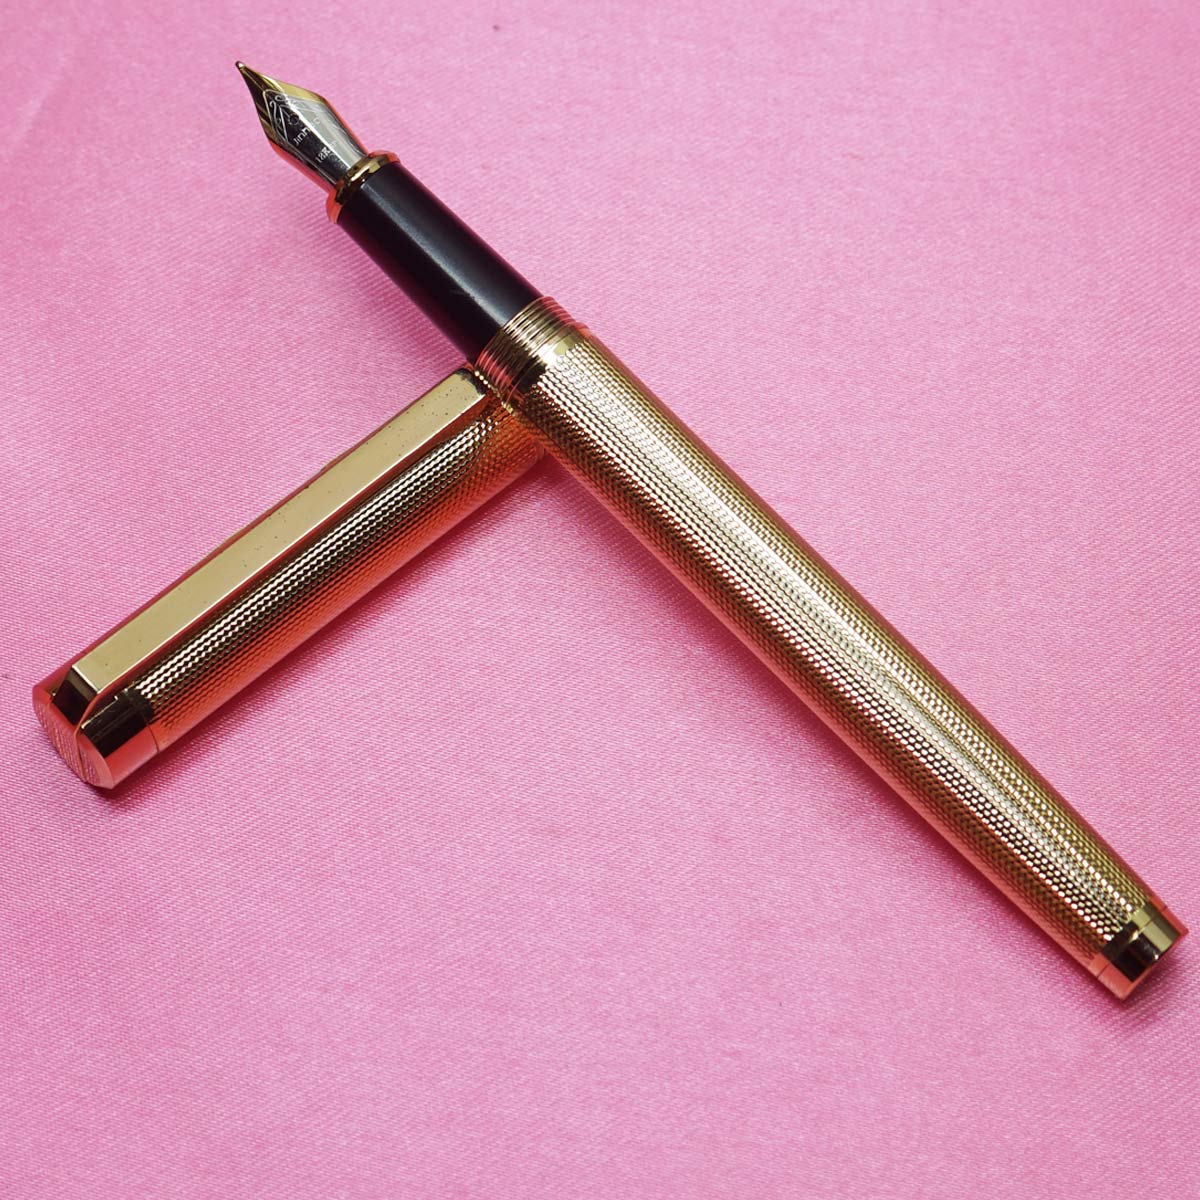 Jinhao 155 Gold Color Body and Cap with Gold Trims No.5.5 Dual Tone Medium Tipped Convertor Type Fountain Pen SKU 22317